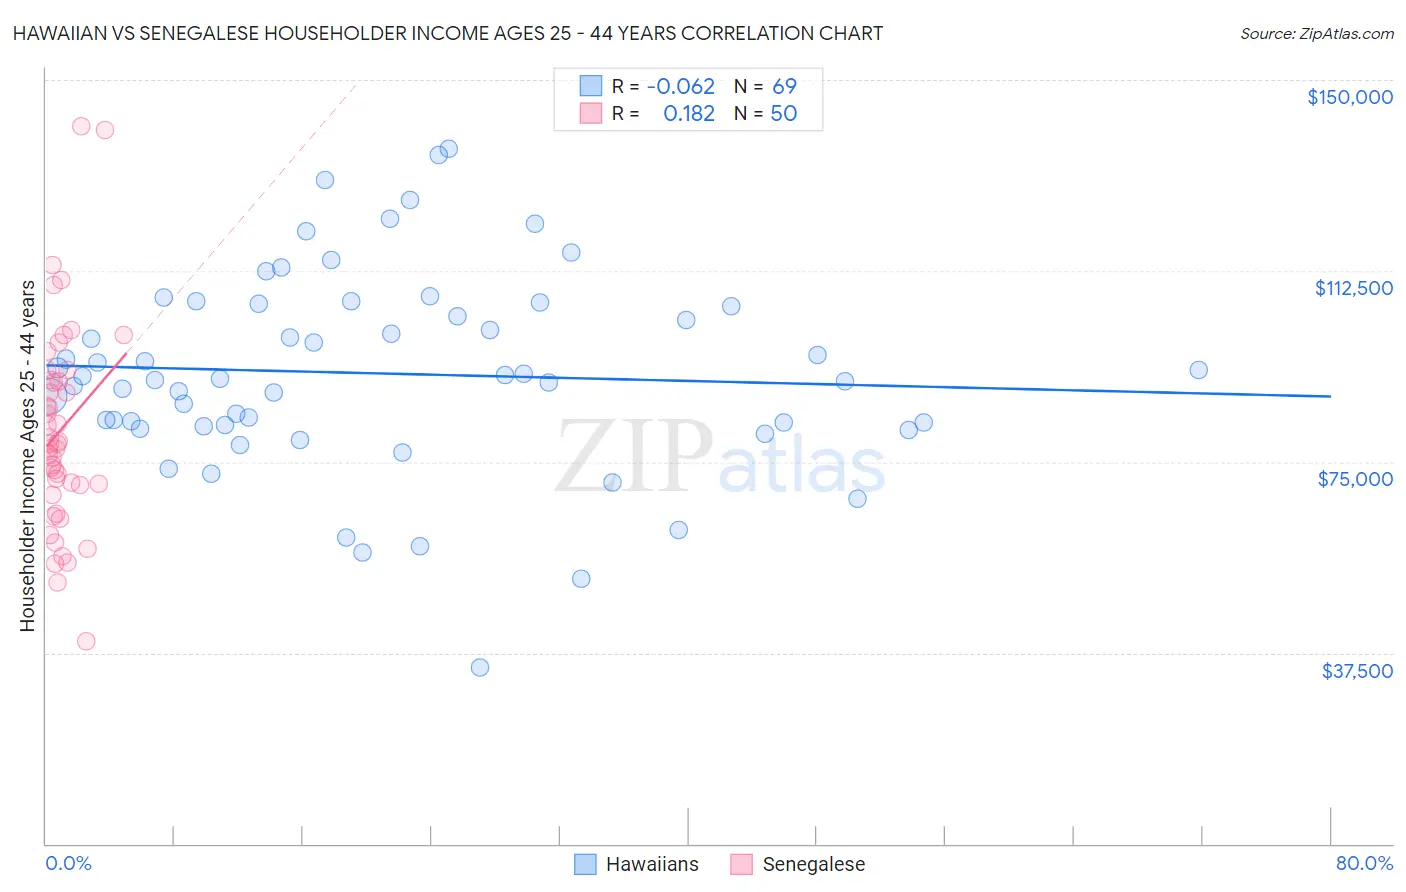 Hawaiian vs Senegalese Householder Income Ages 25 - 44 years